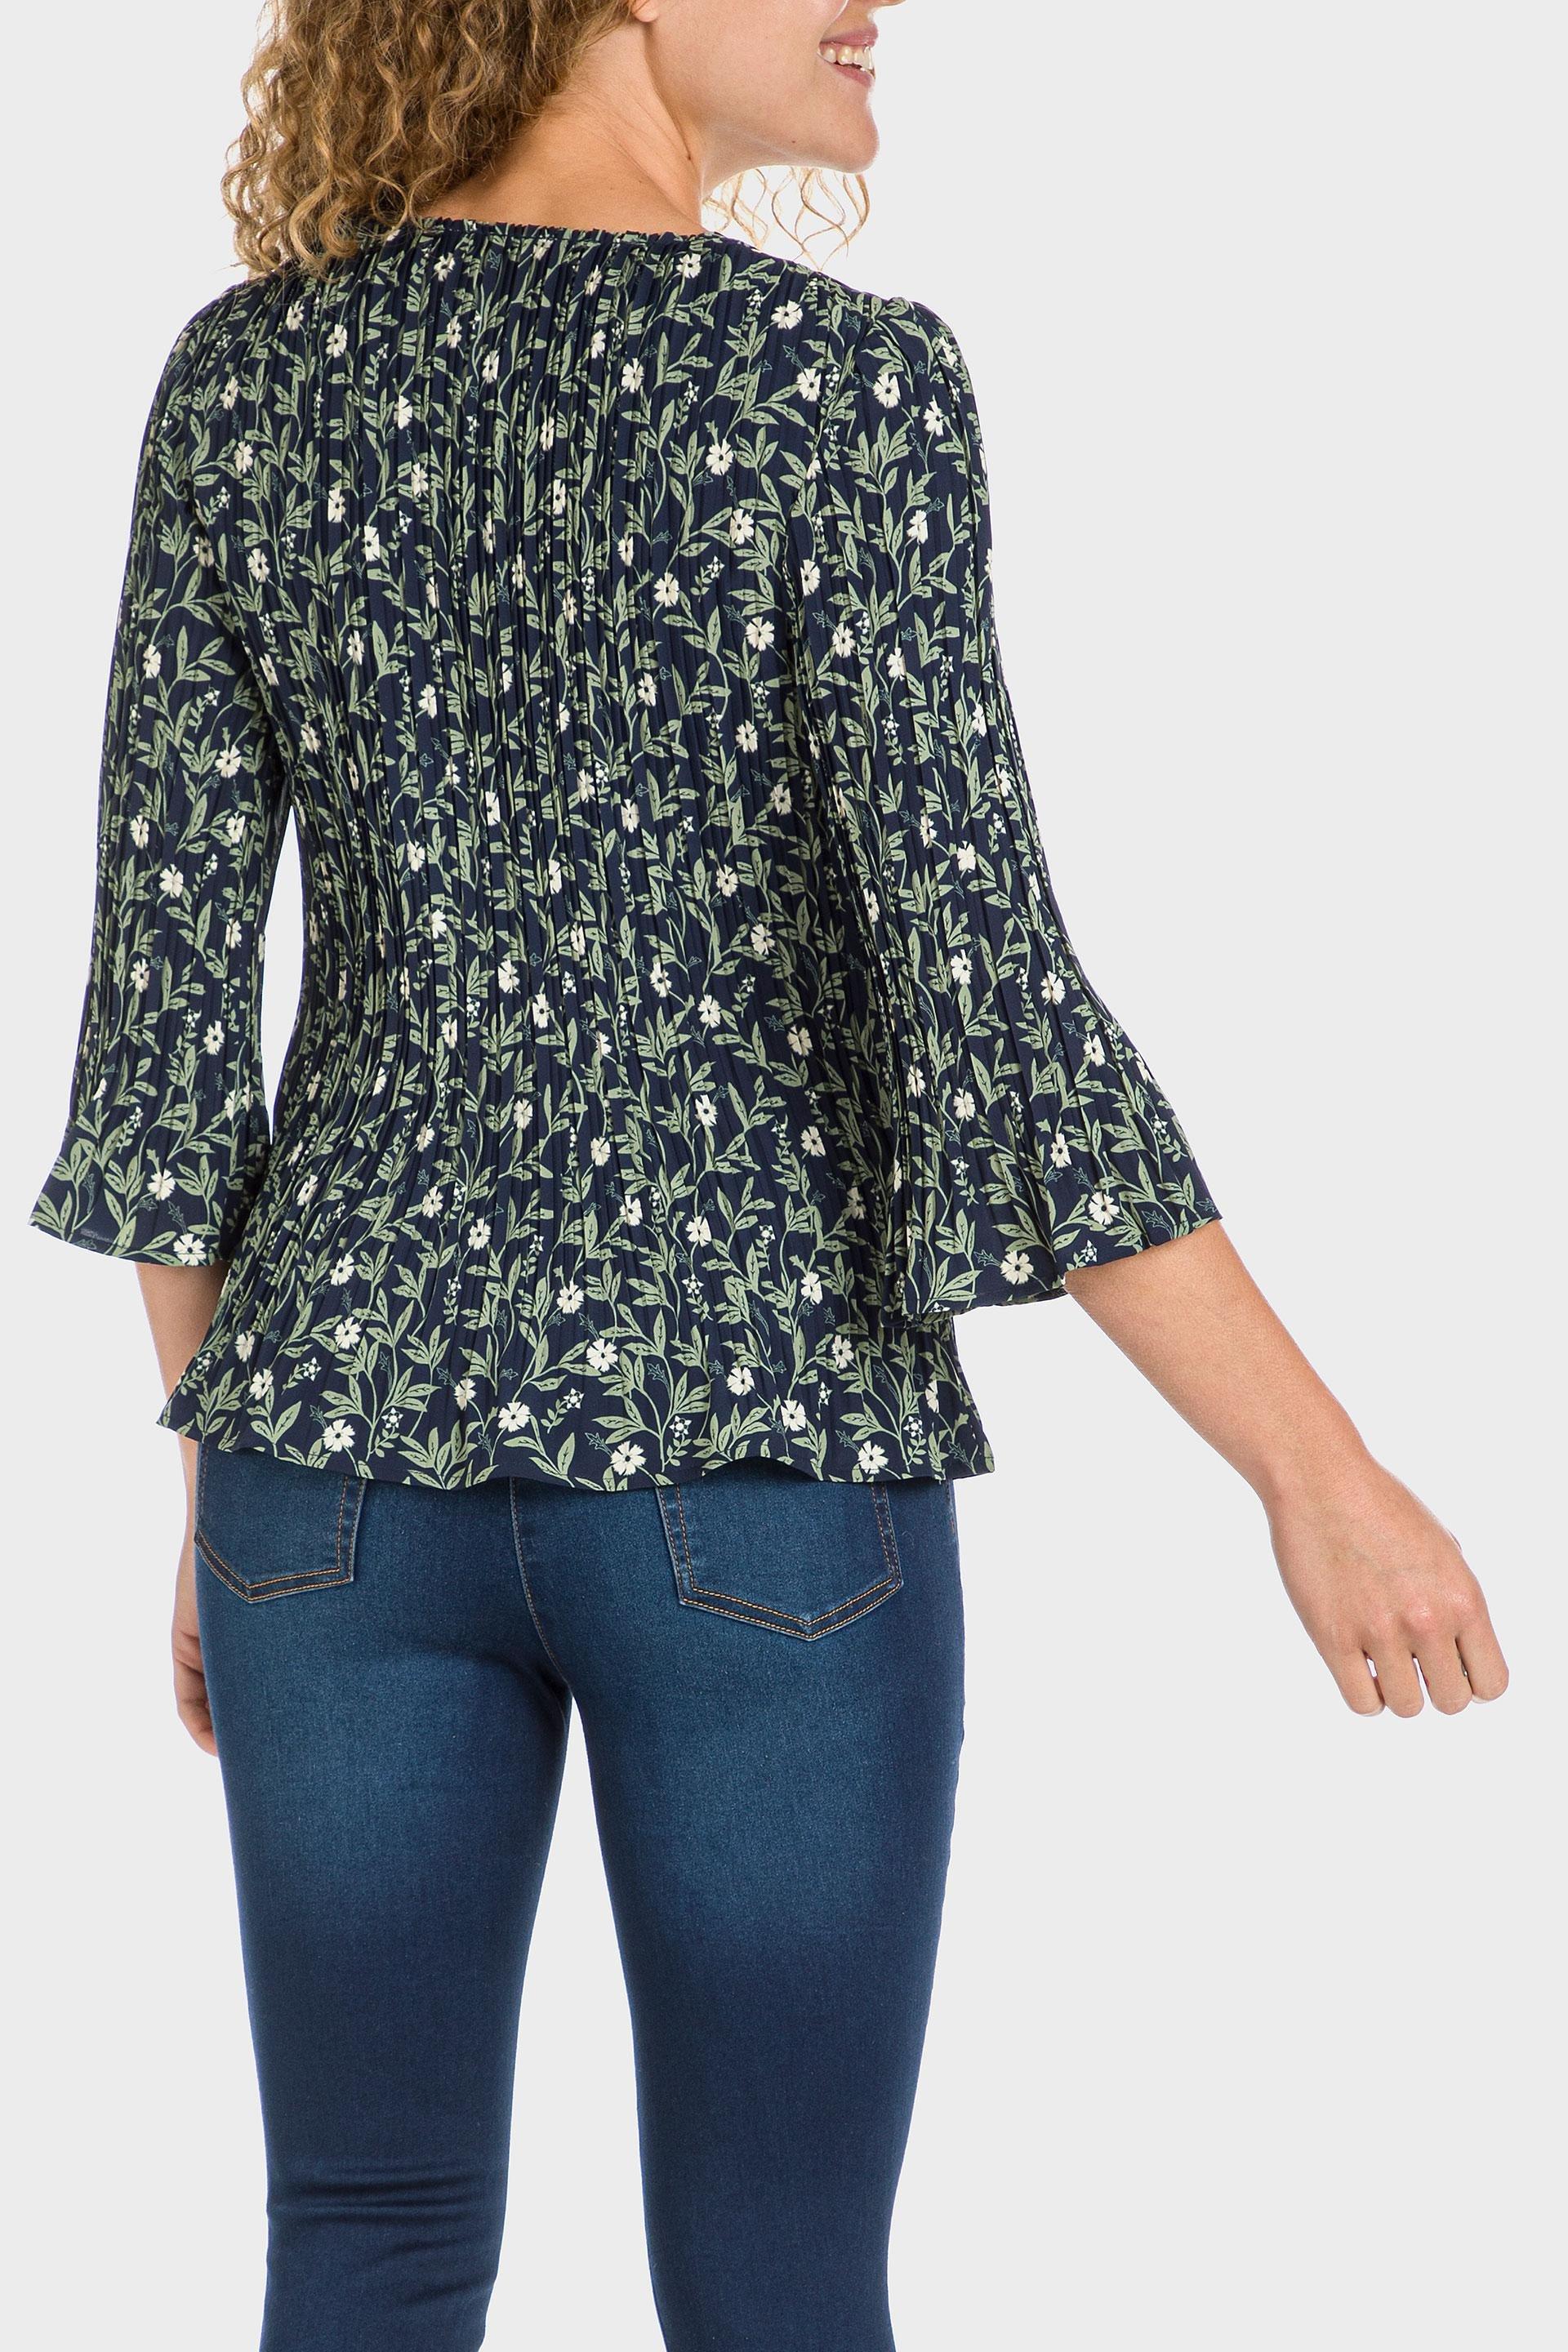 Punt Roma - Navy Floral Blouse